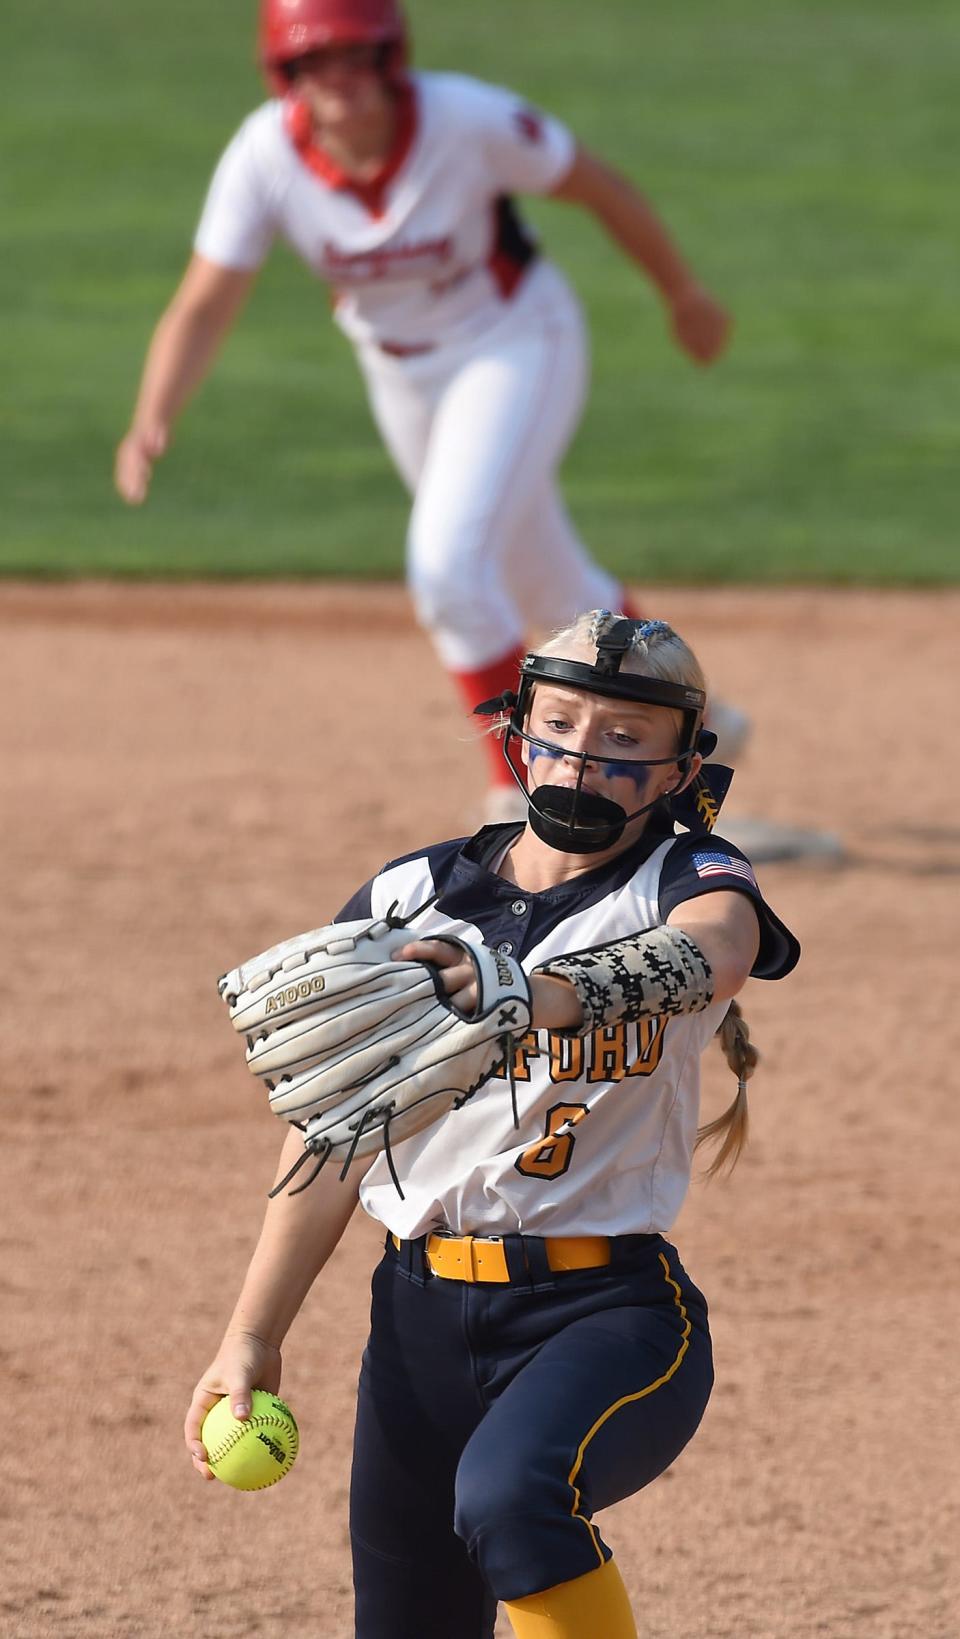 Pitcher Unity Nelson shuts down Laingsburg as they threaten as the Bobcats beat Laingsburg 8-0 in the Division 3 state semifinals at Seehia Stadium, MSU Friday, June 16, 2023.